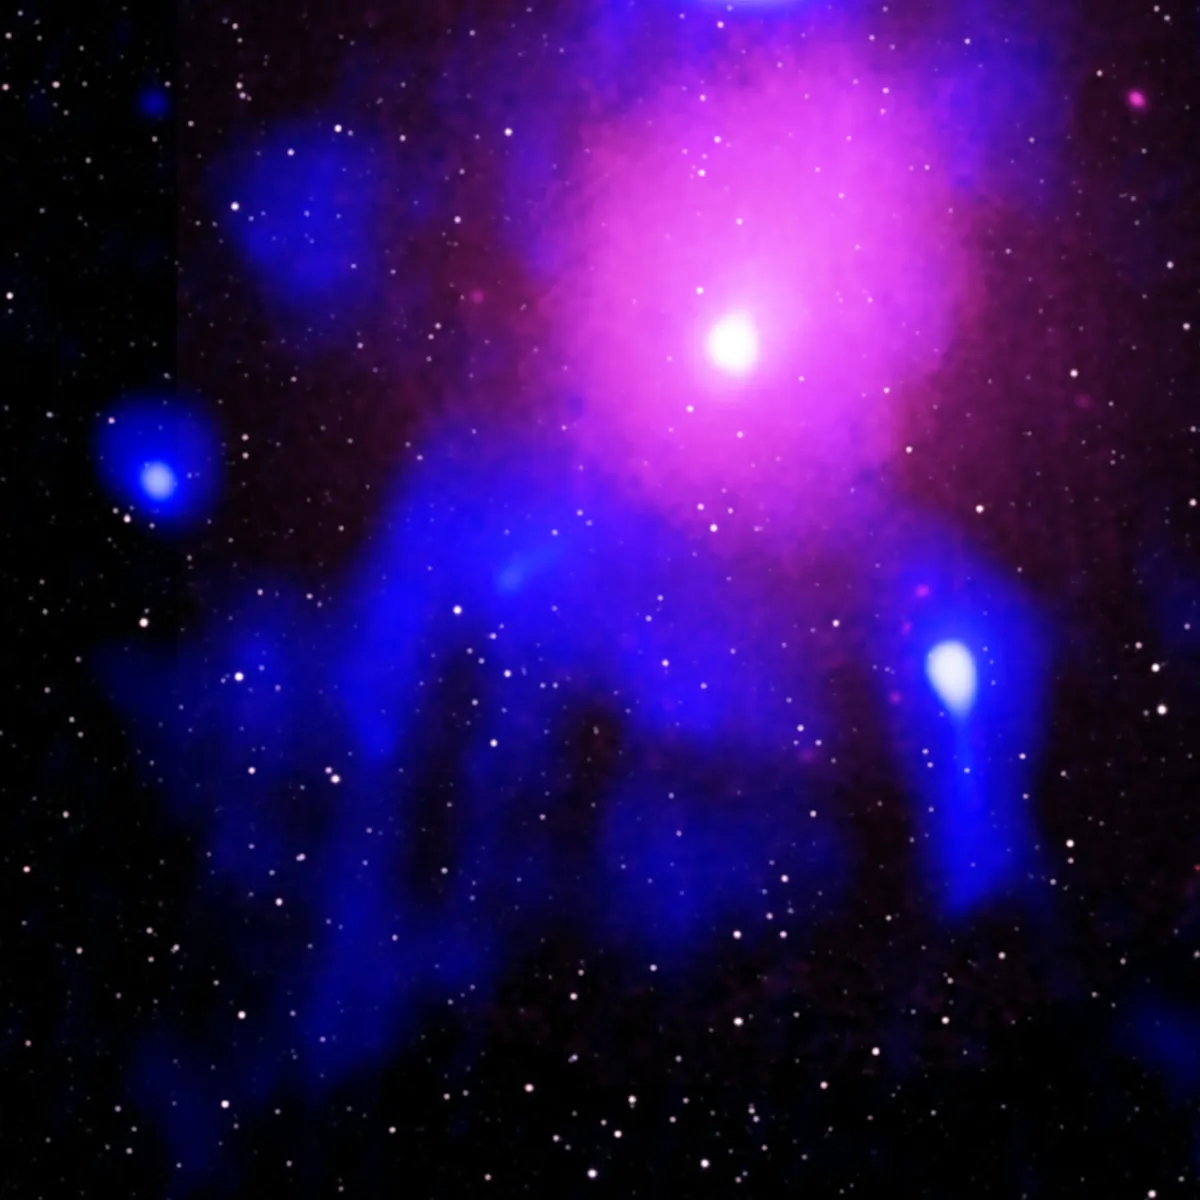 Ophiuchus galaxy cluster explosion